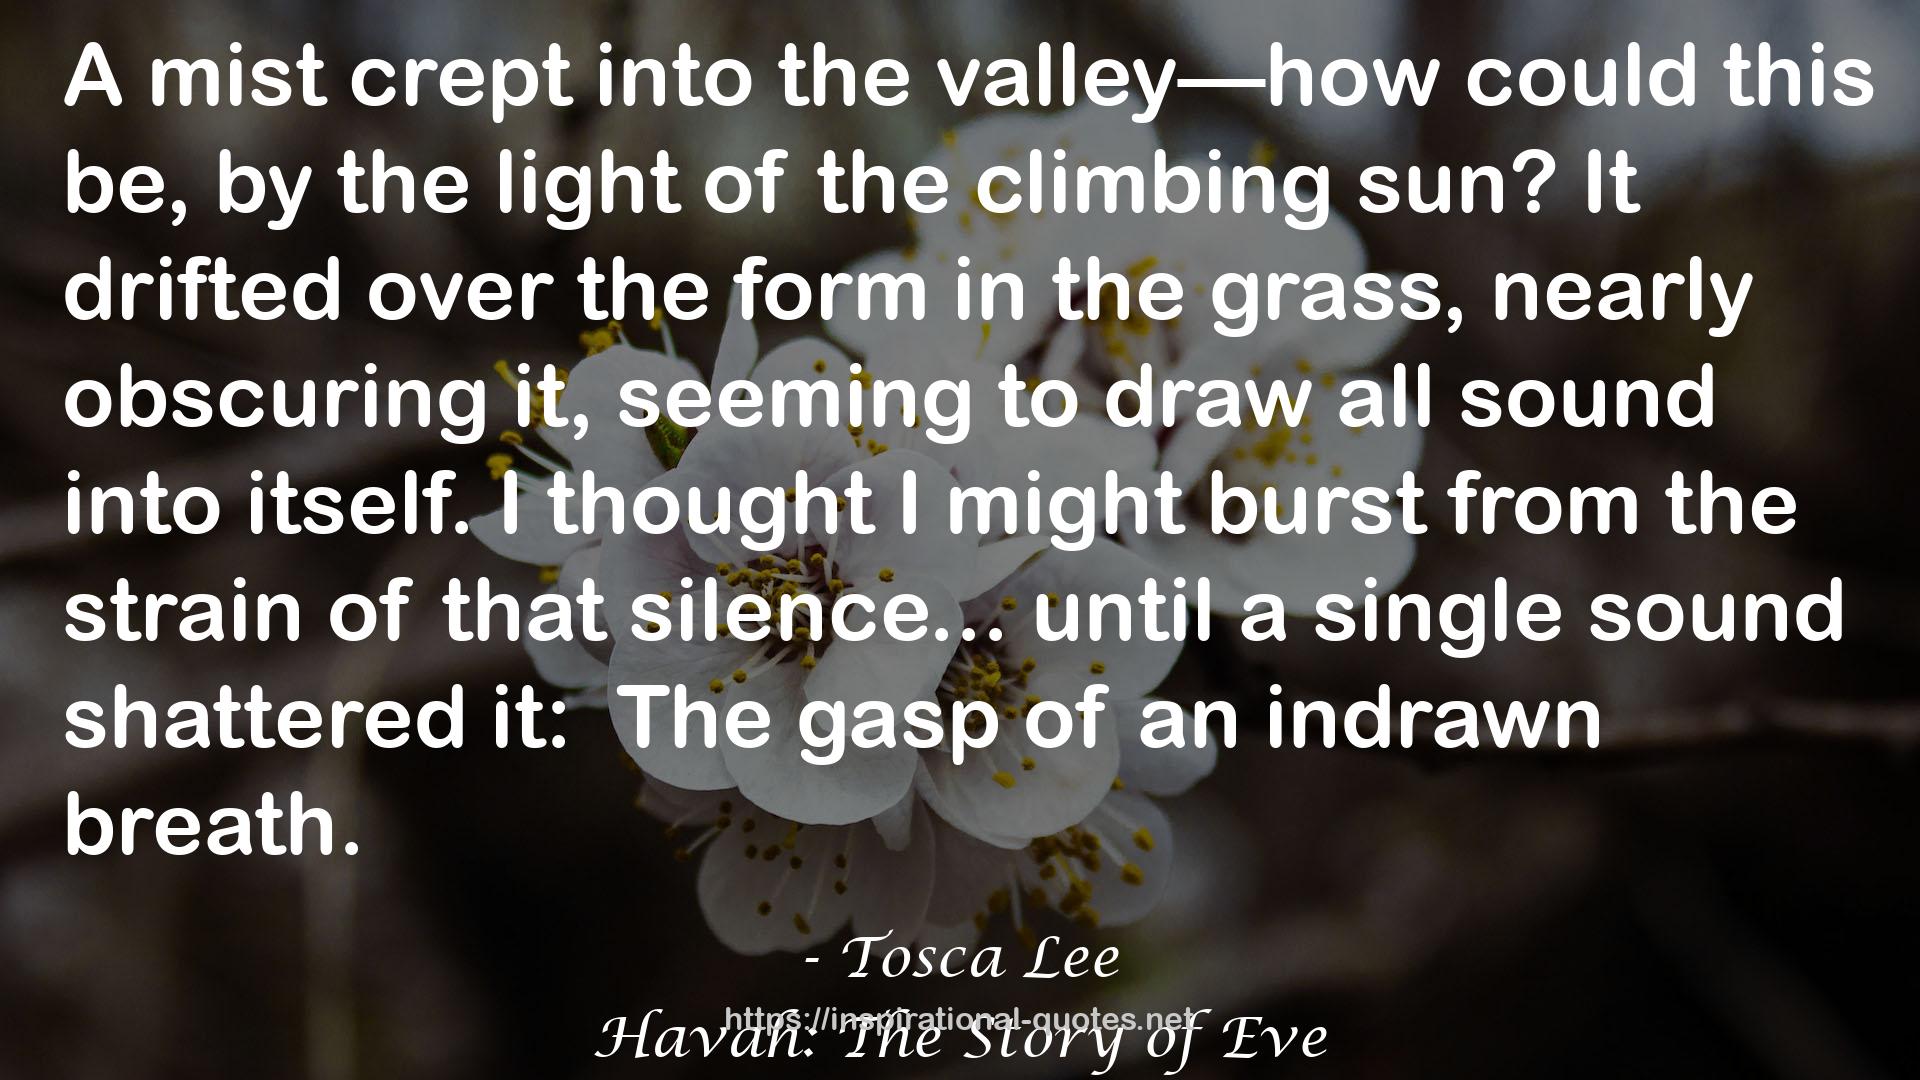 Havah: The Story of Eve QUOTES